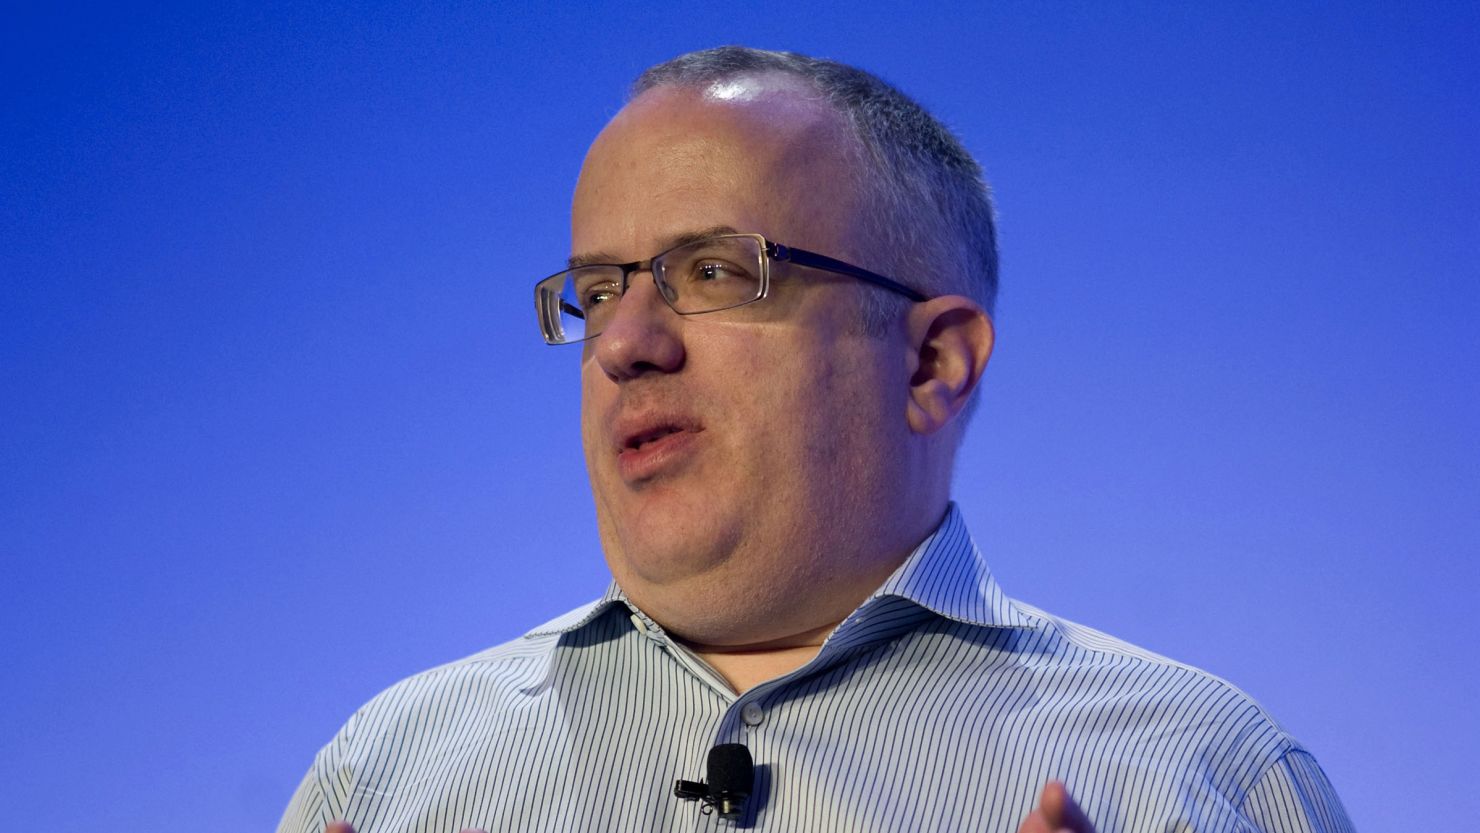 Mozilla CEO Brendan Eich resigned after an uproar over his 2008 donation to California's Proposition 8 campaign.